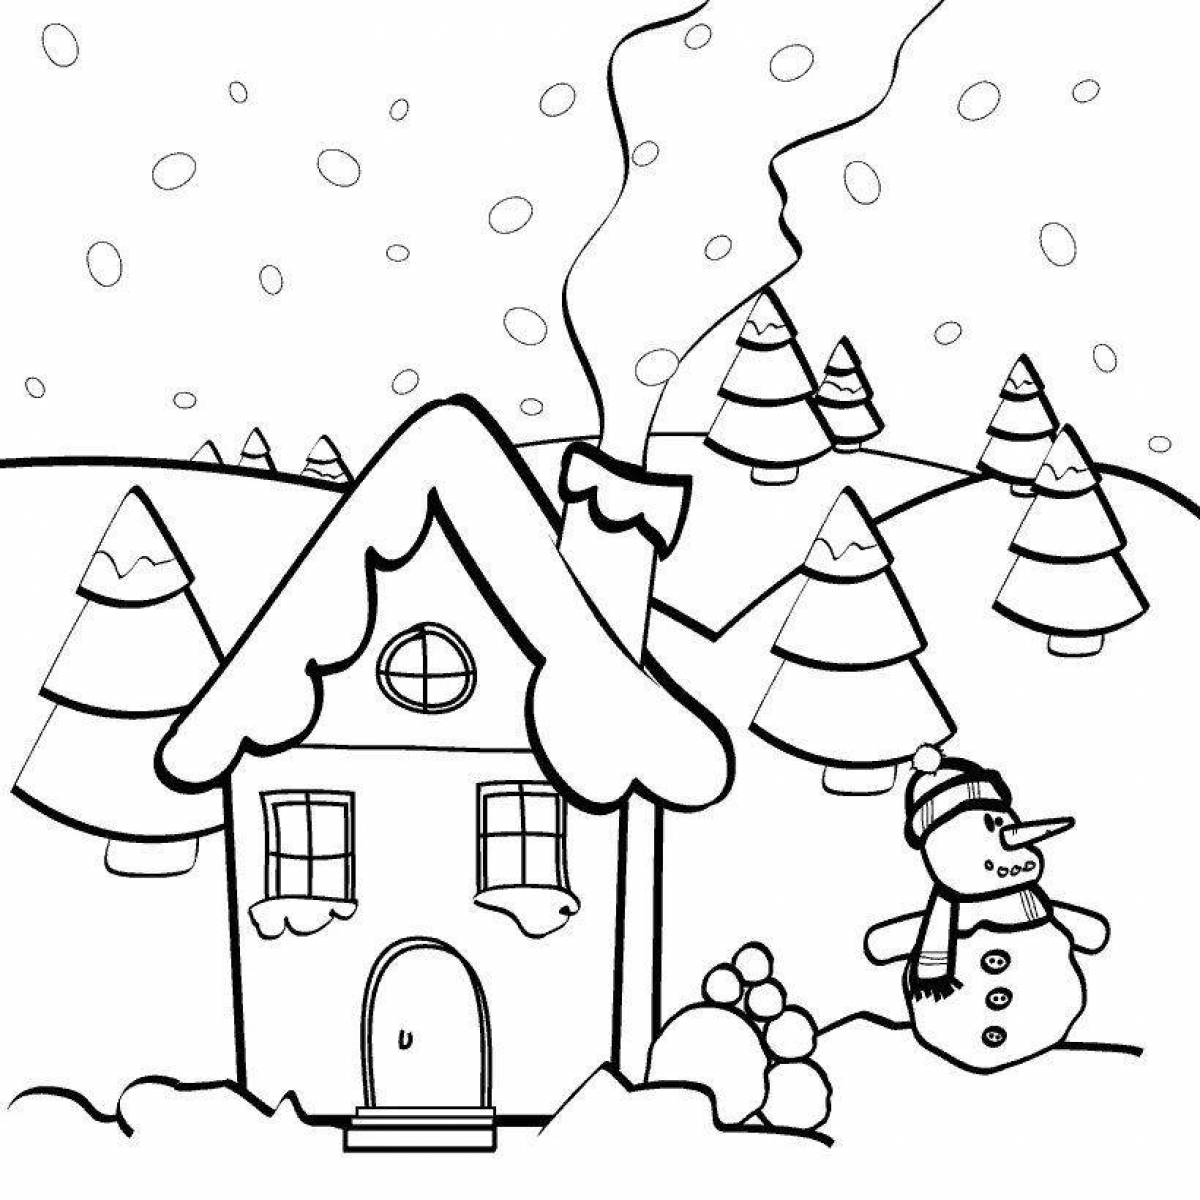 Coloring page dazzling Christmas house